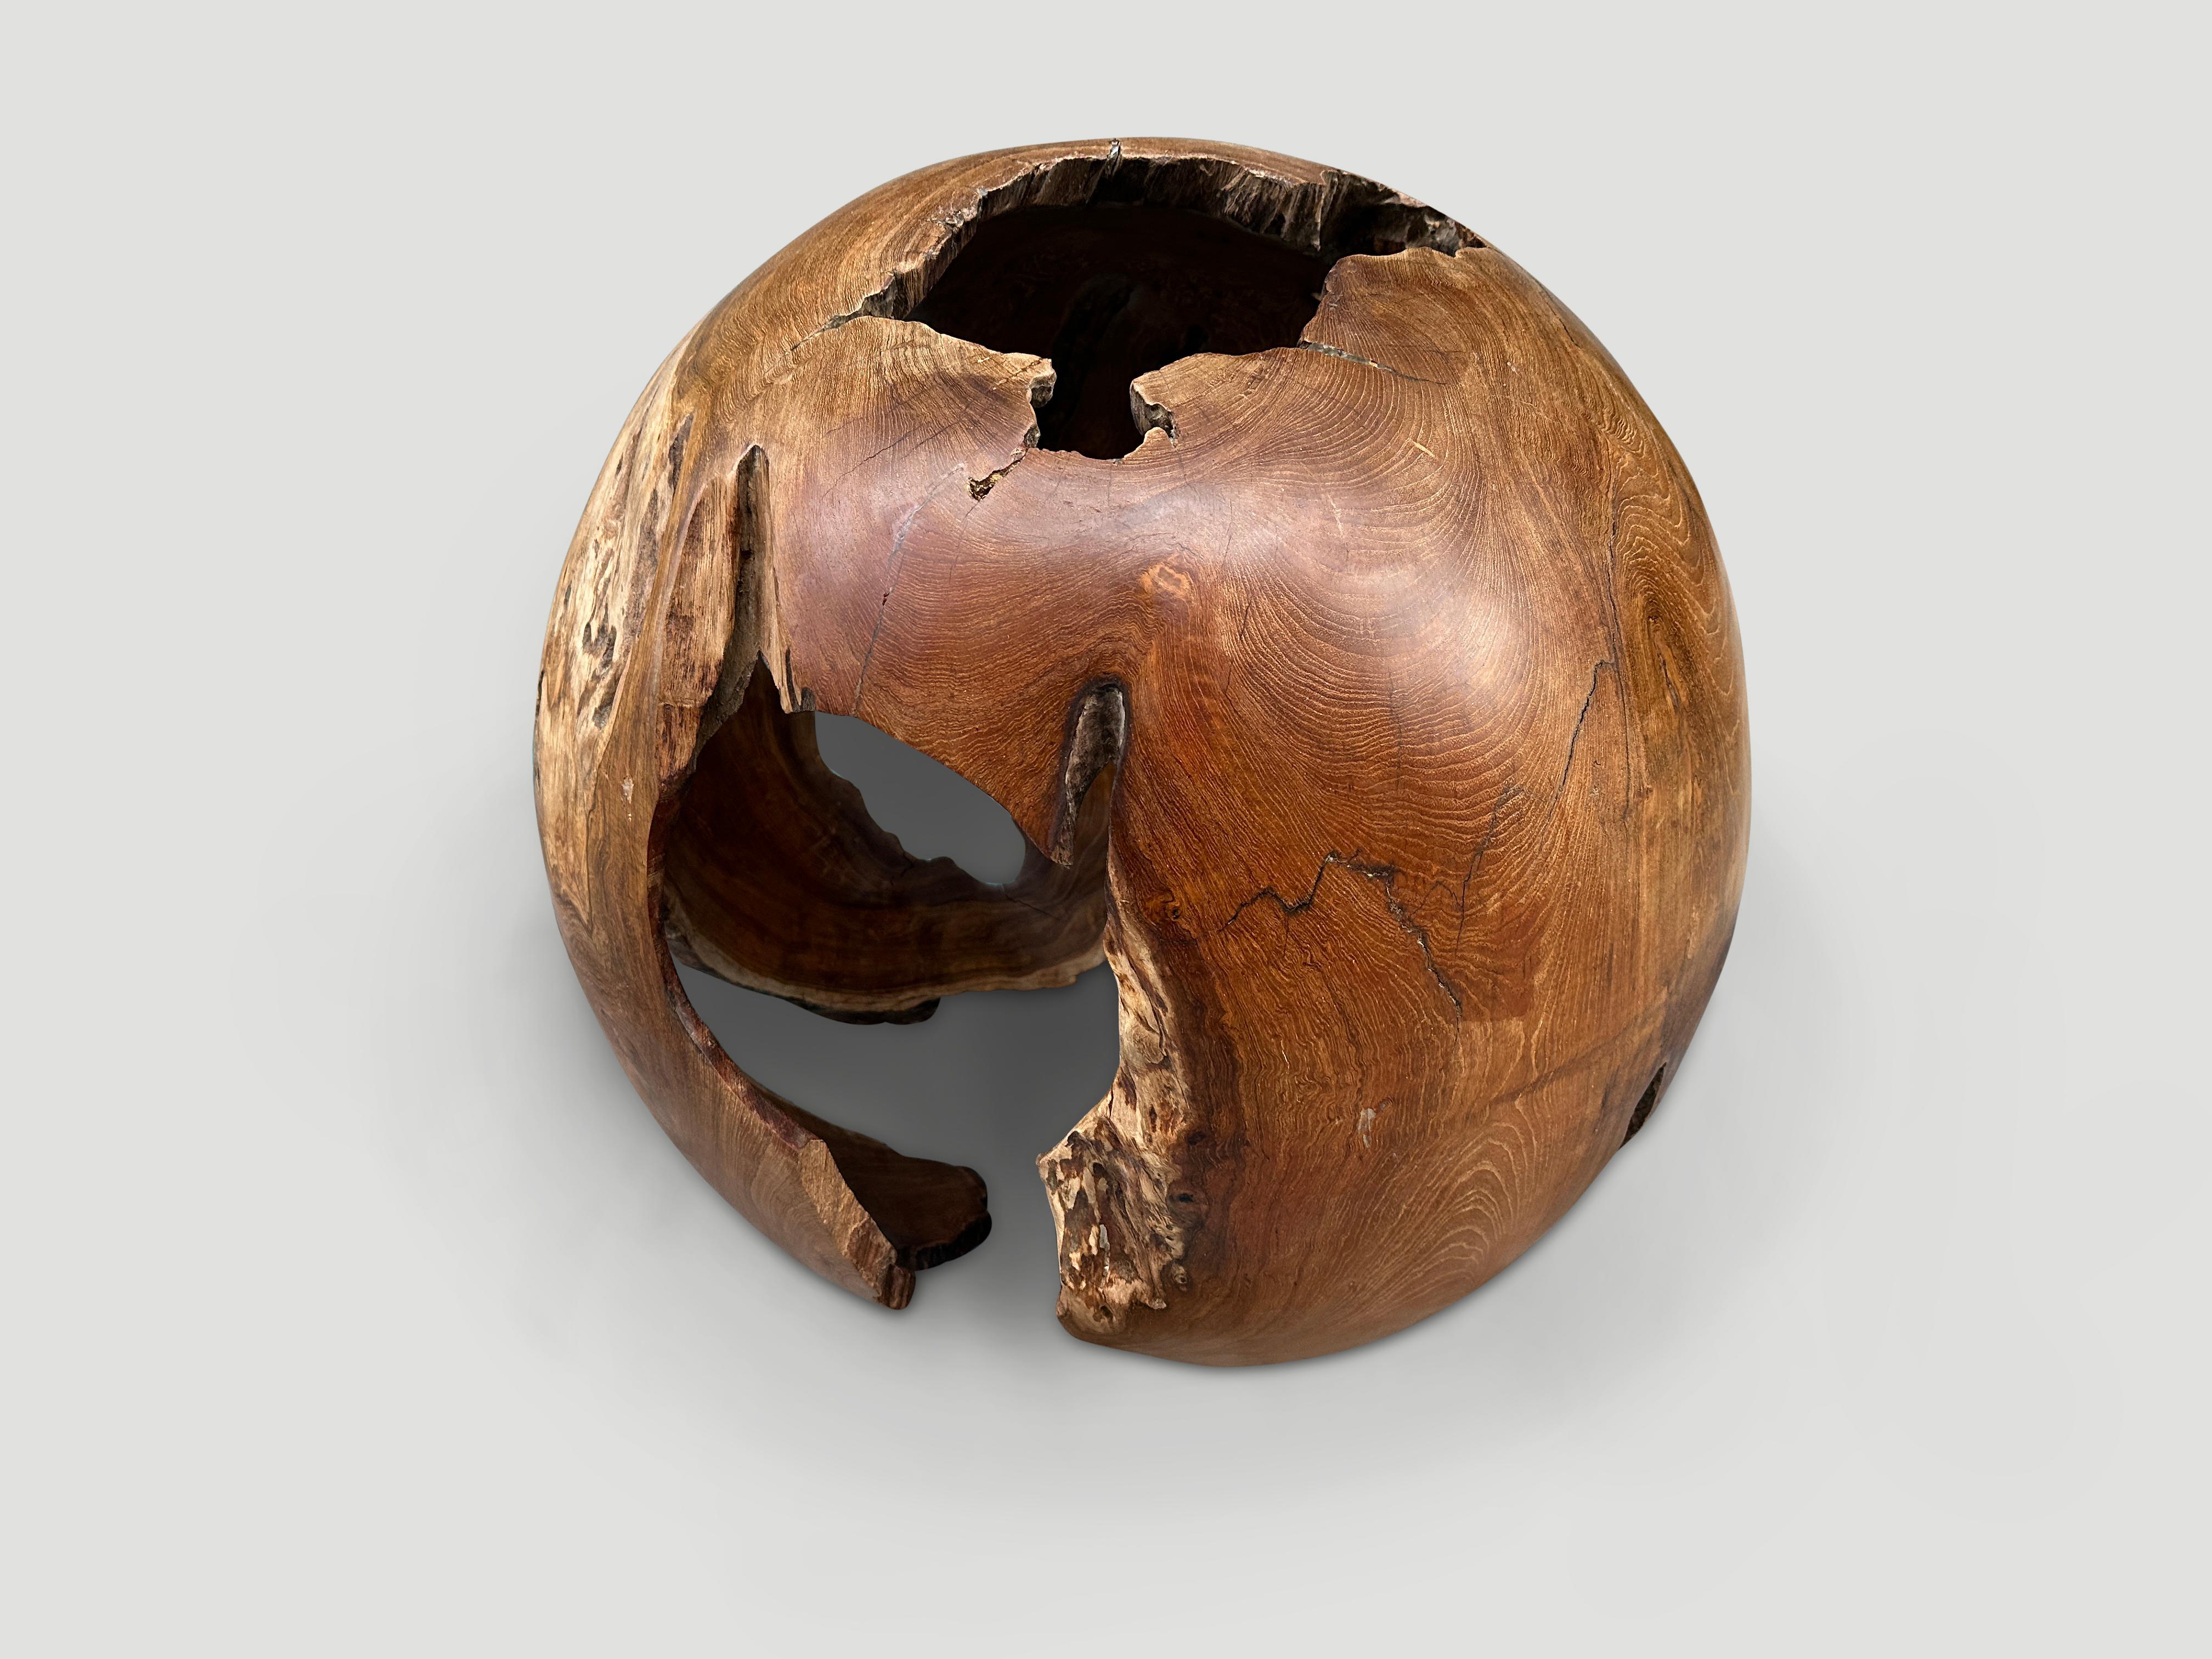 Andrianna Shamaris Hollowed Out Teak Wood Organic Sphere  In Excellent Condition For Sale In New York, NY